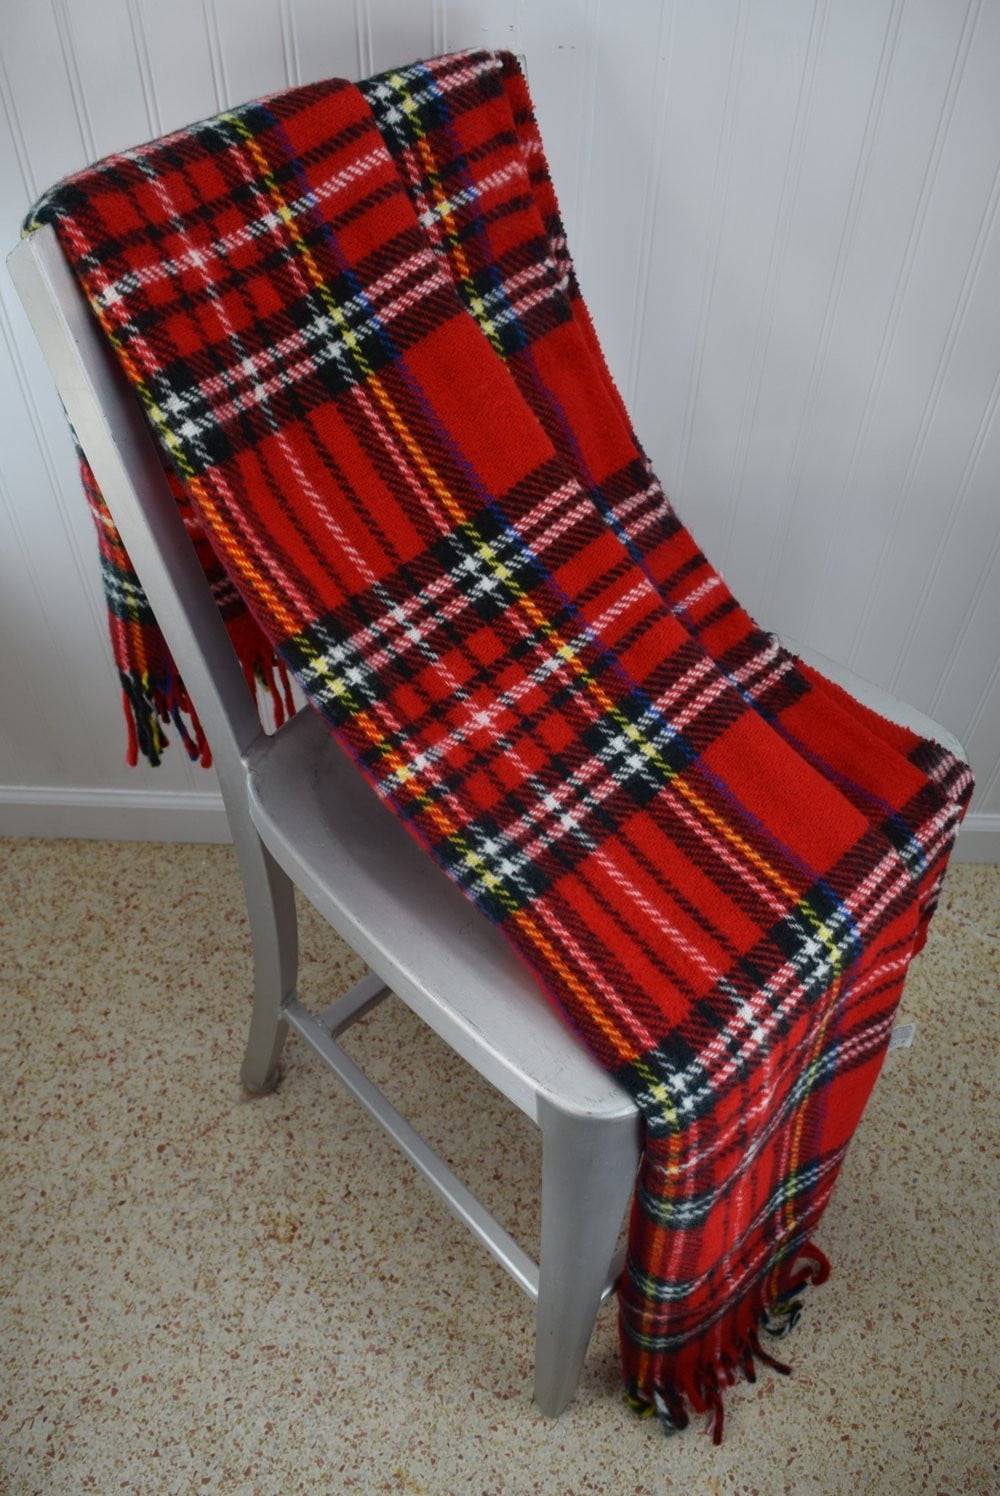 USA Acrylic Throw Fringed Blanket Bright Red Plaid classic